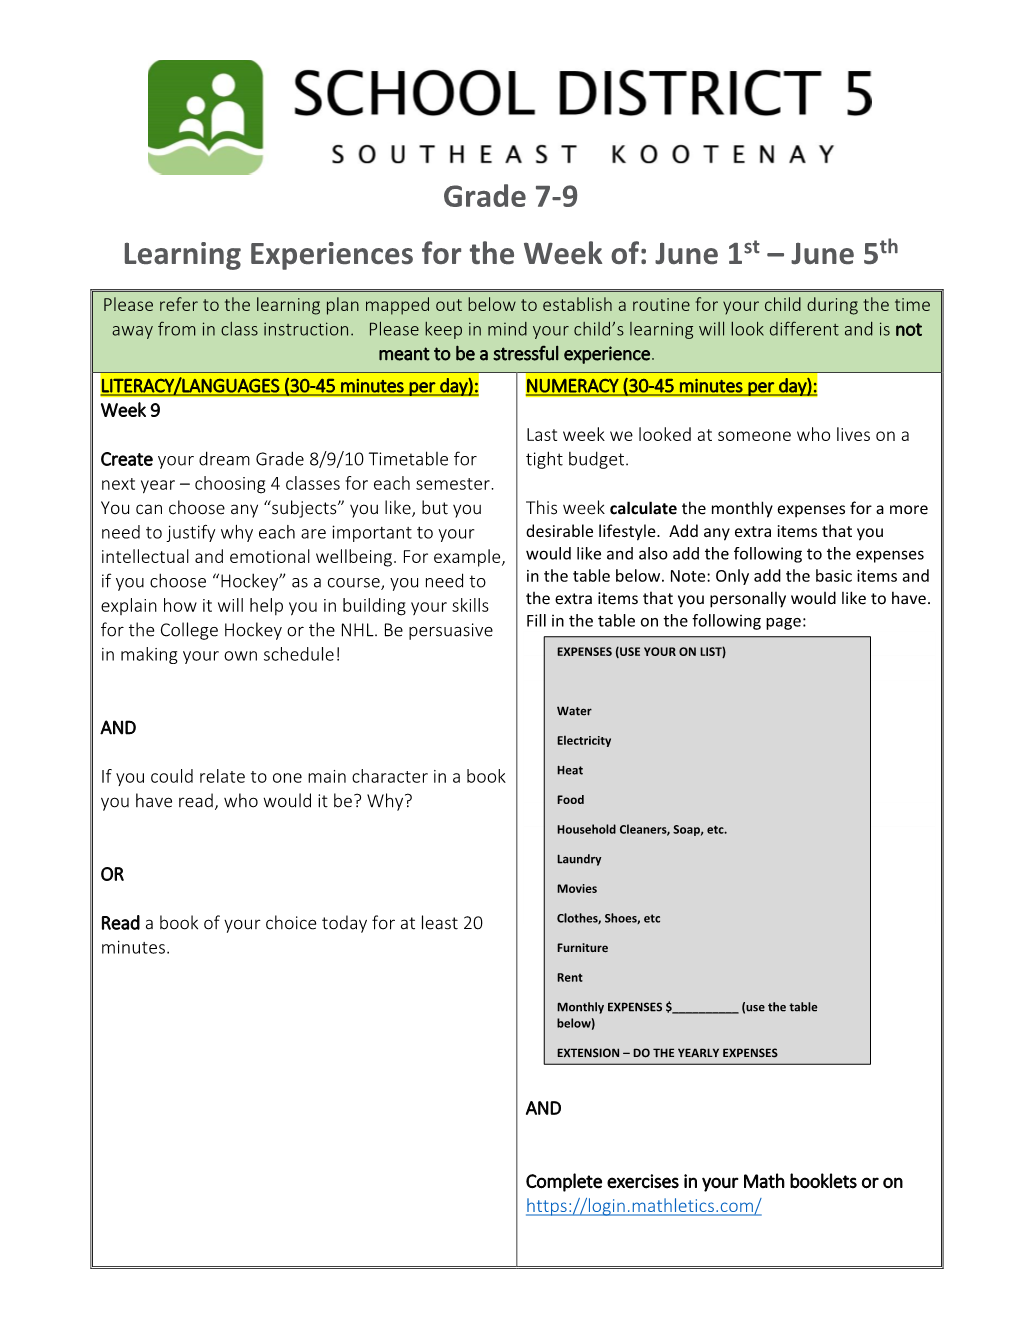 Grade 7-9 Learning Experiences for the Week Of: June 1St – June